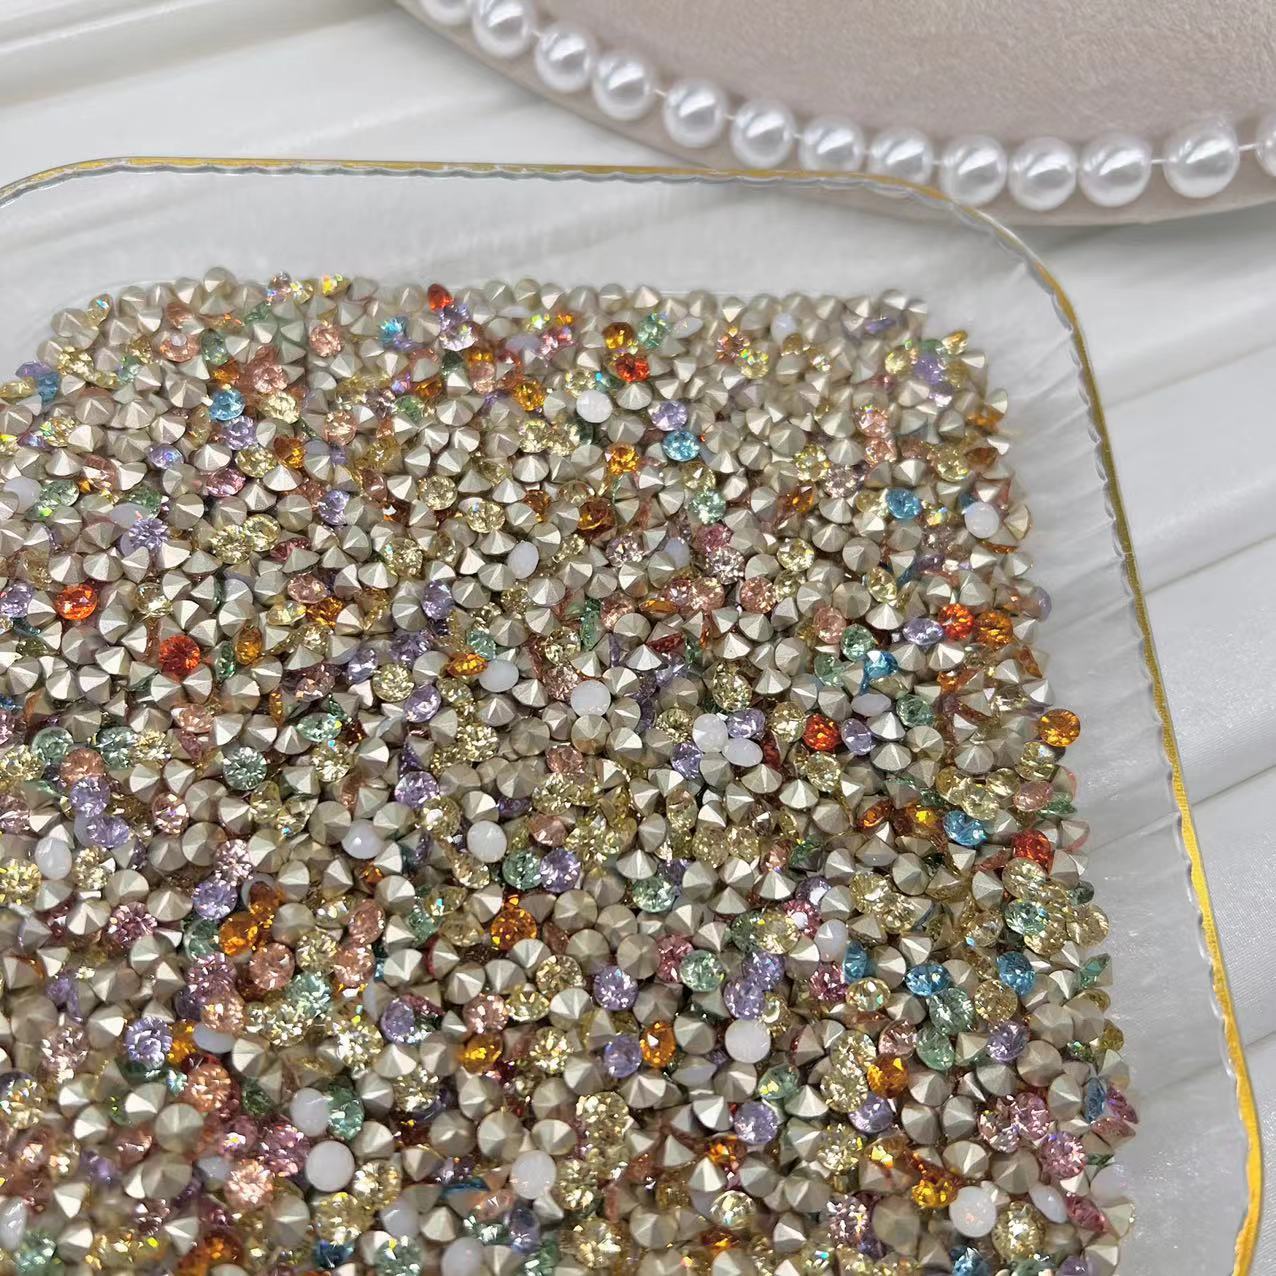 5mm Shiyue Surface 33 Cut Surface Nail Beauty Rhinestone Ornaments Shoes Clothing Coat and Cap Bag Jewelry Accessories